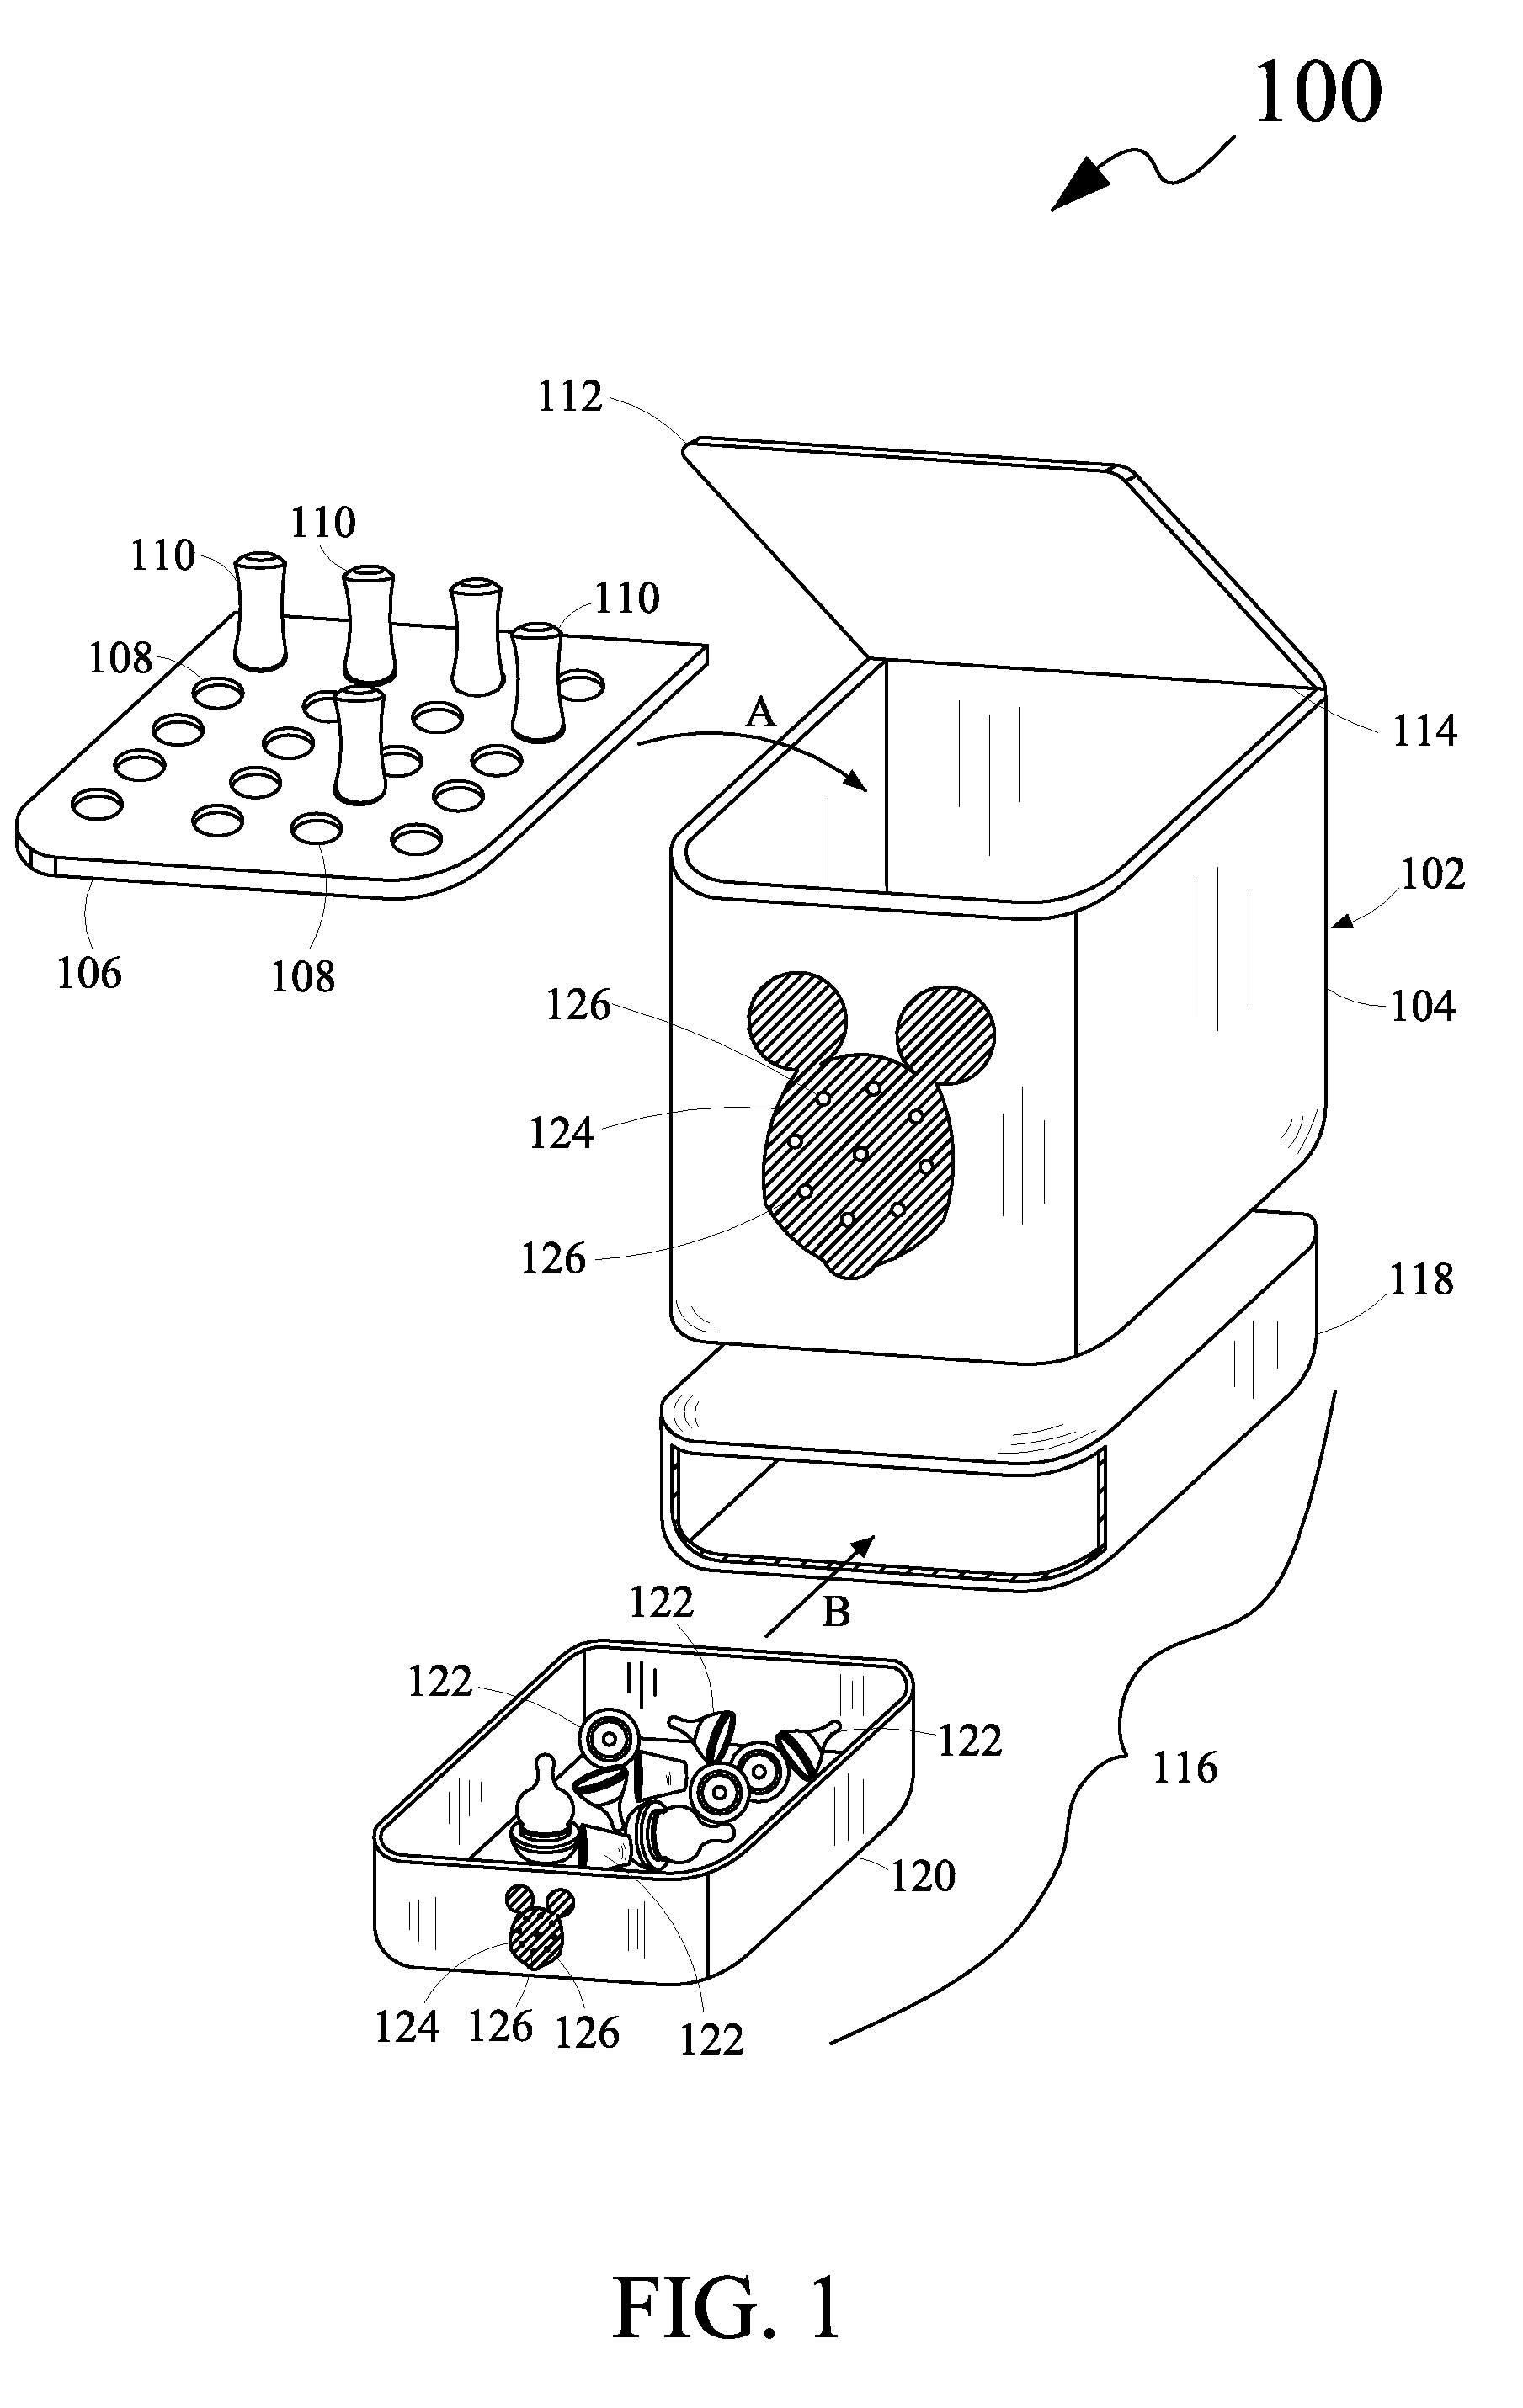 Apparatus for storing baby bottles